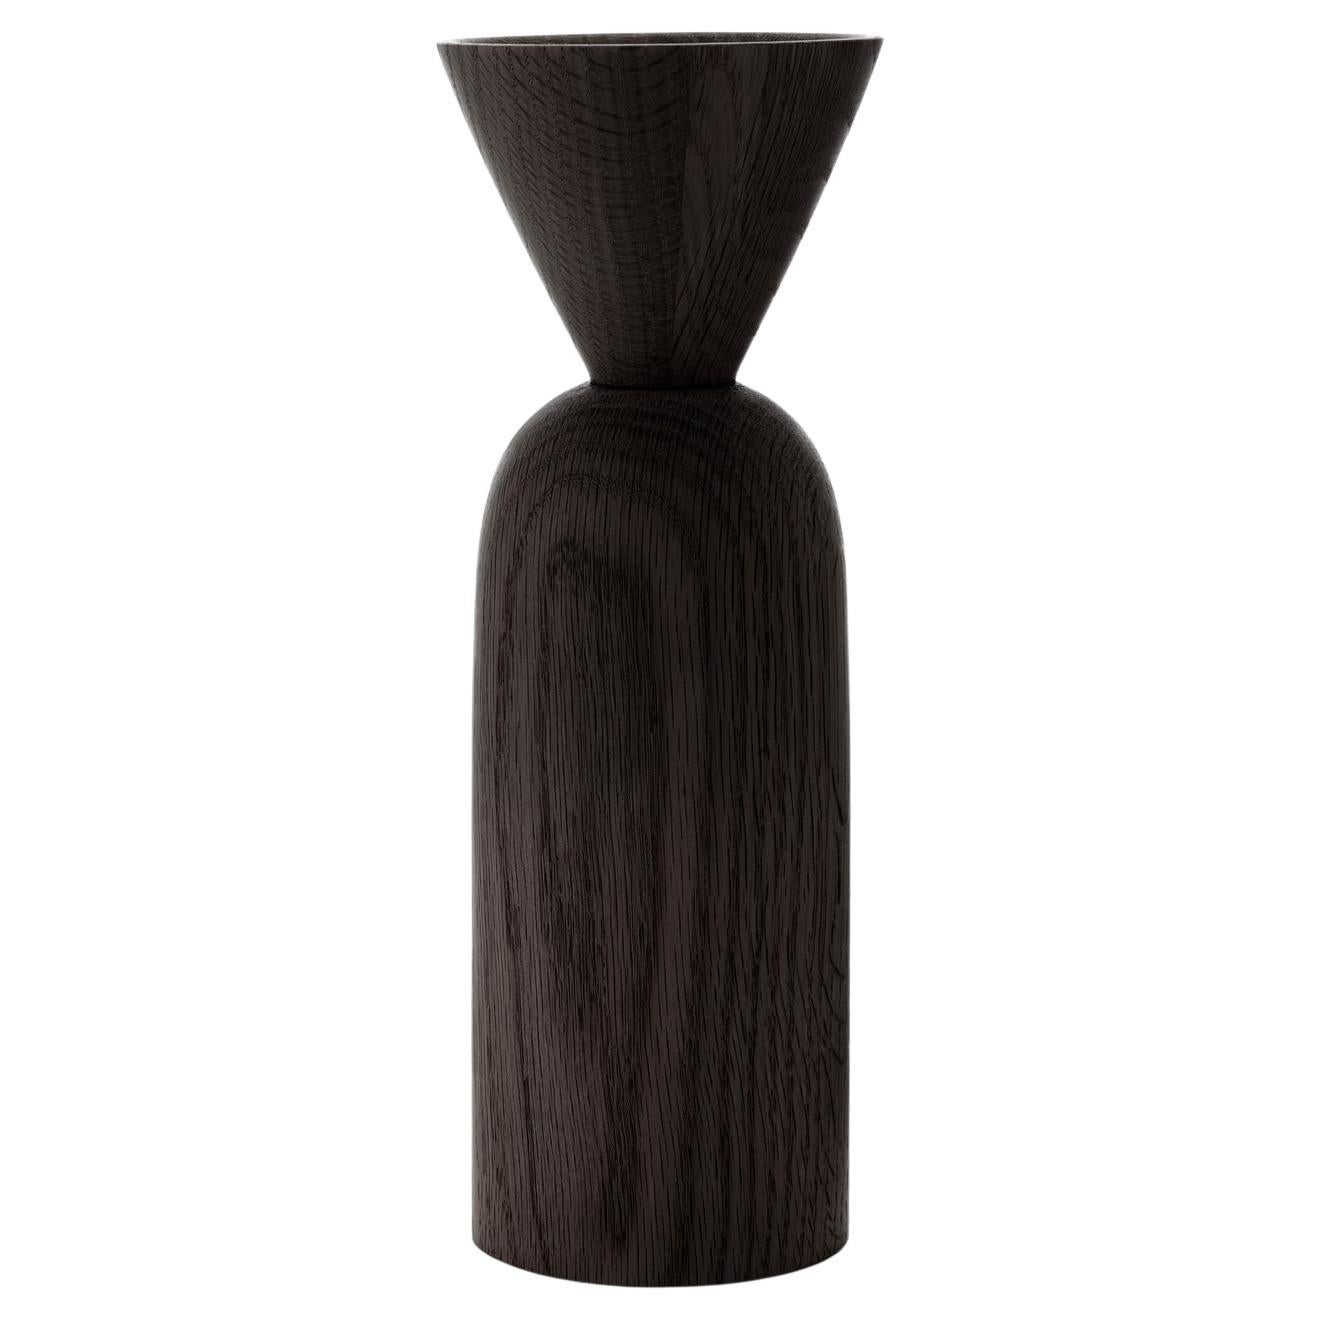 Cone Shape Black Stained Oak Vase by Applicata